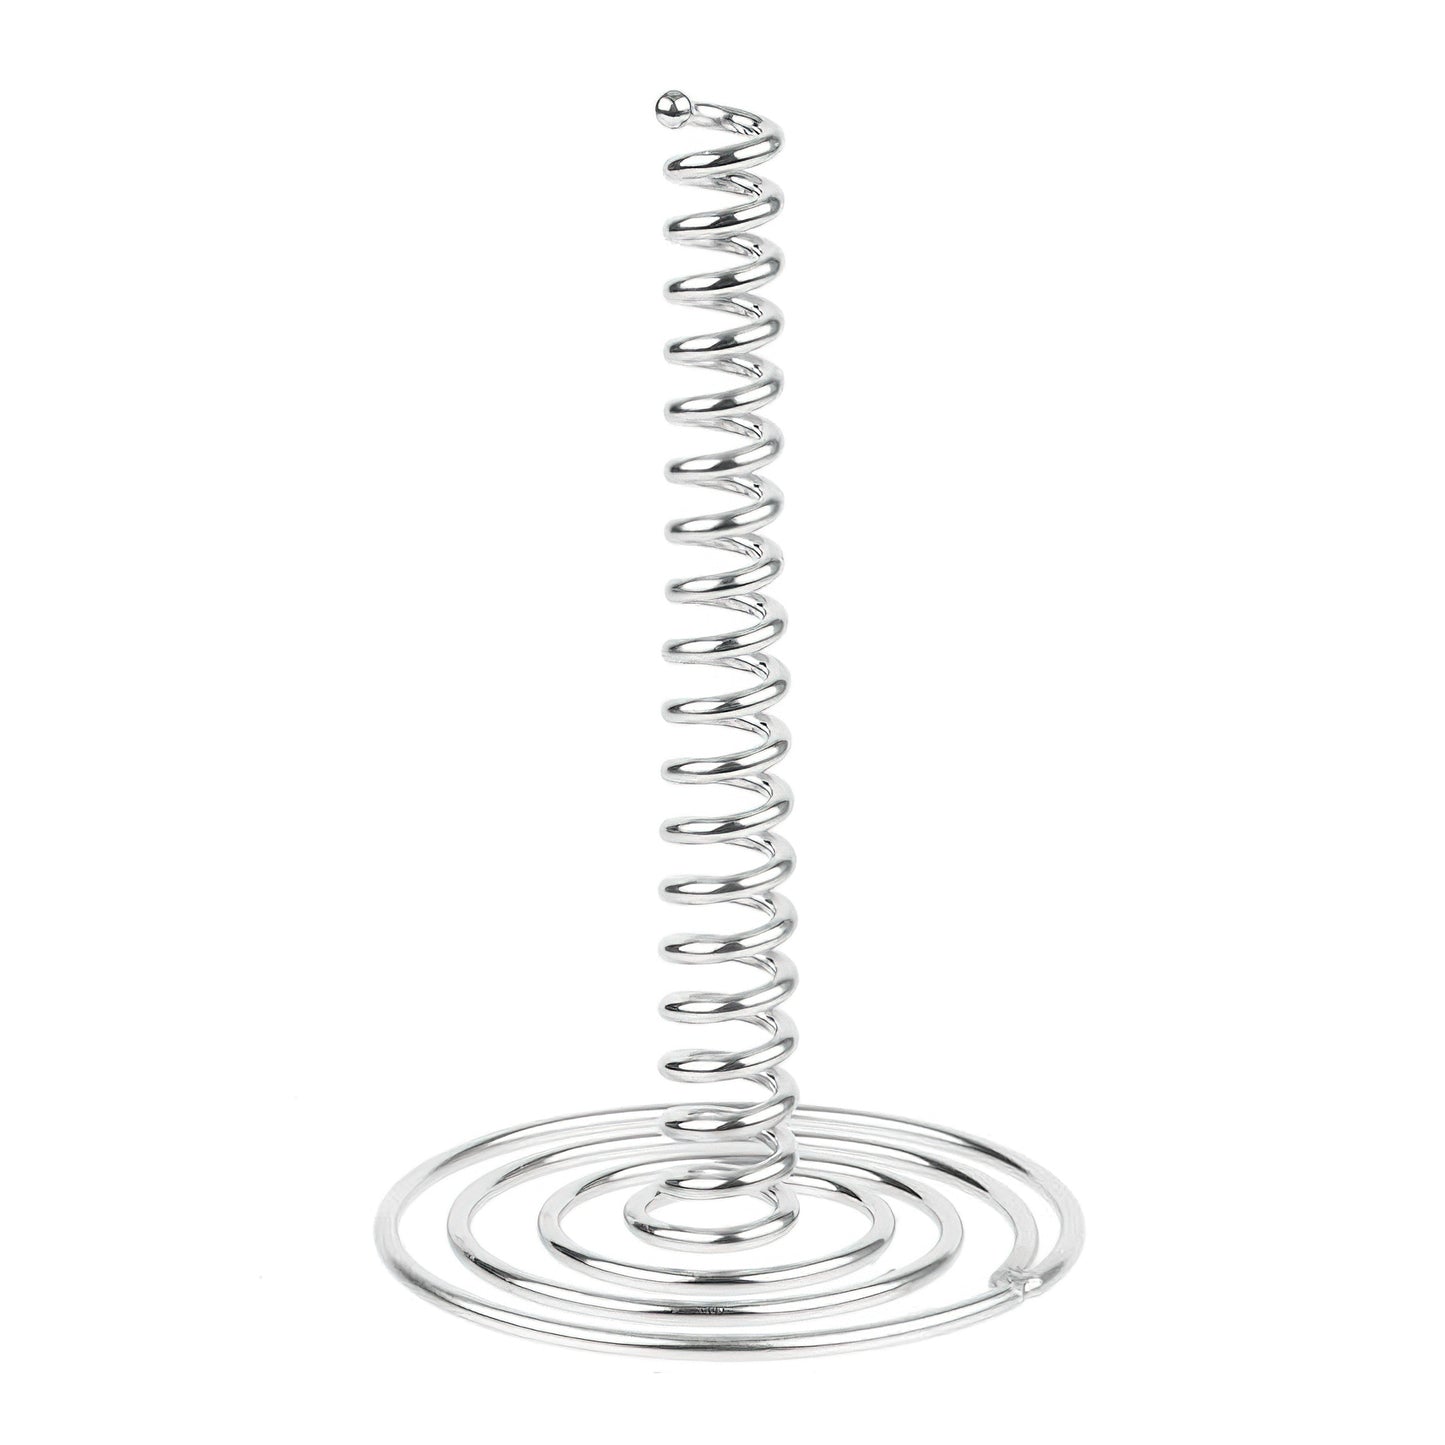 Onion Ring Spiral Tower, 4.25" dia., 7" Tall